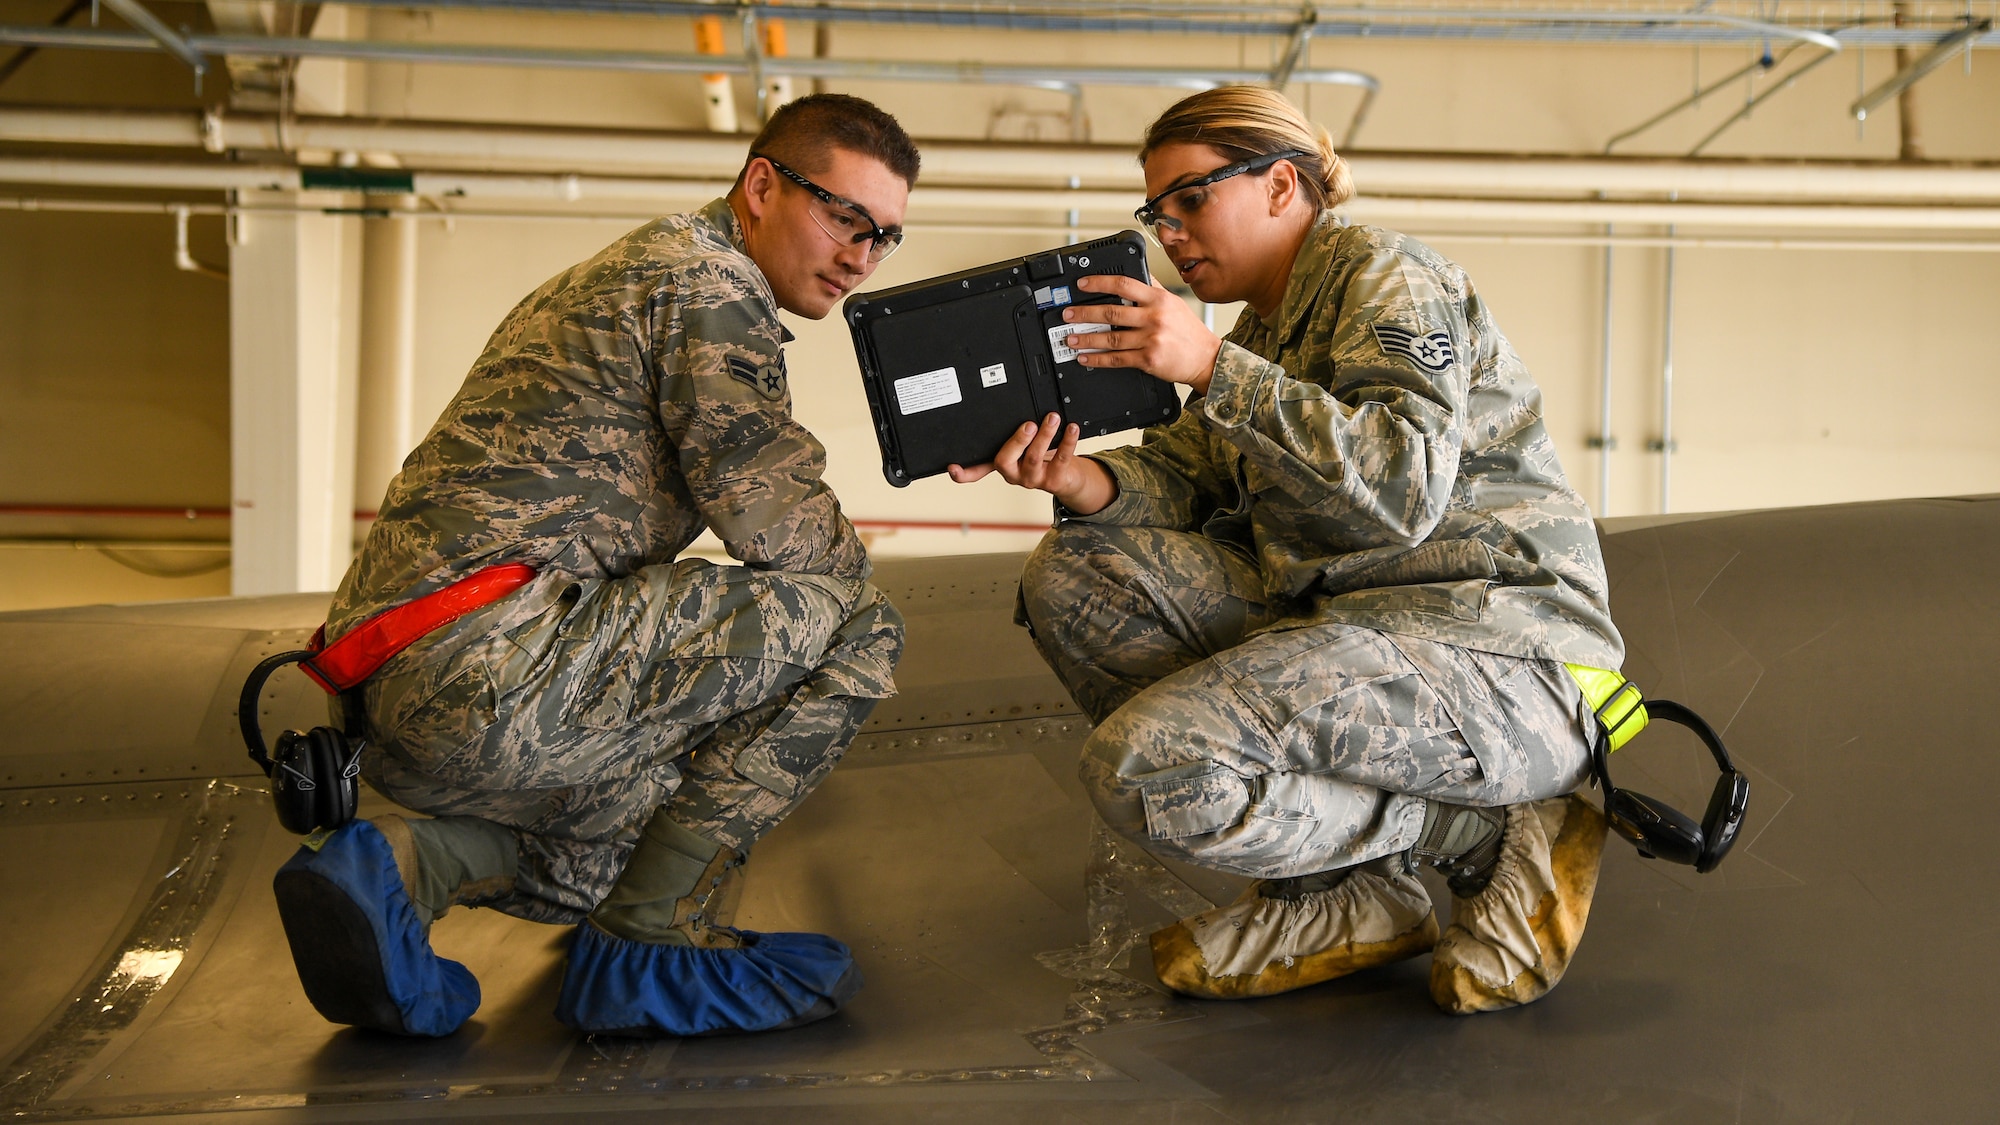 388th Fighter Wing F-35A maintainers use new tablets to connect with jet.